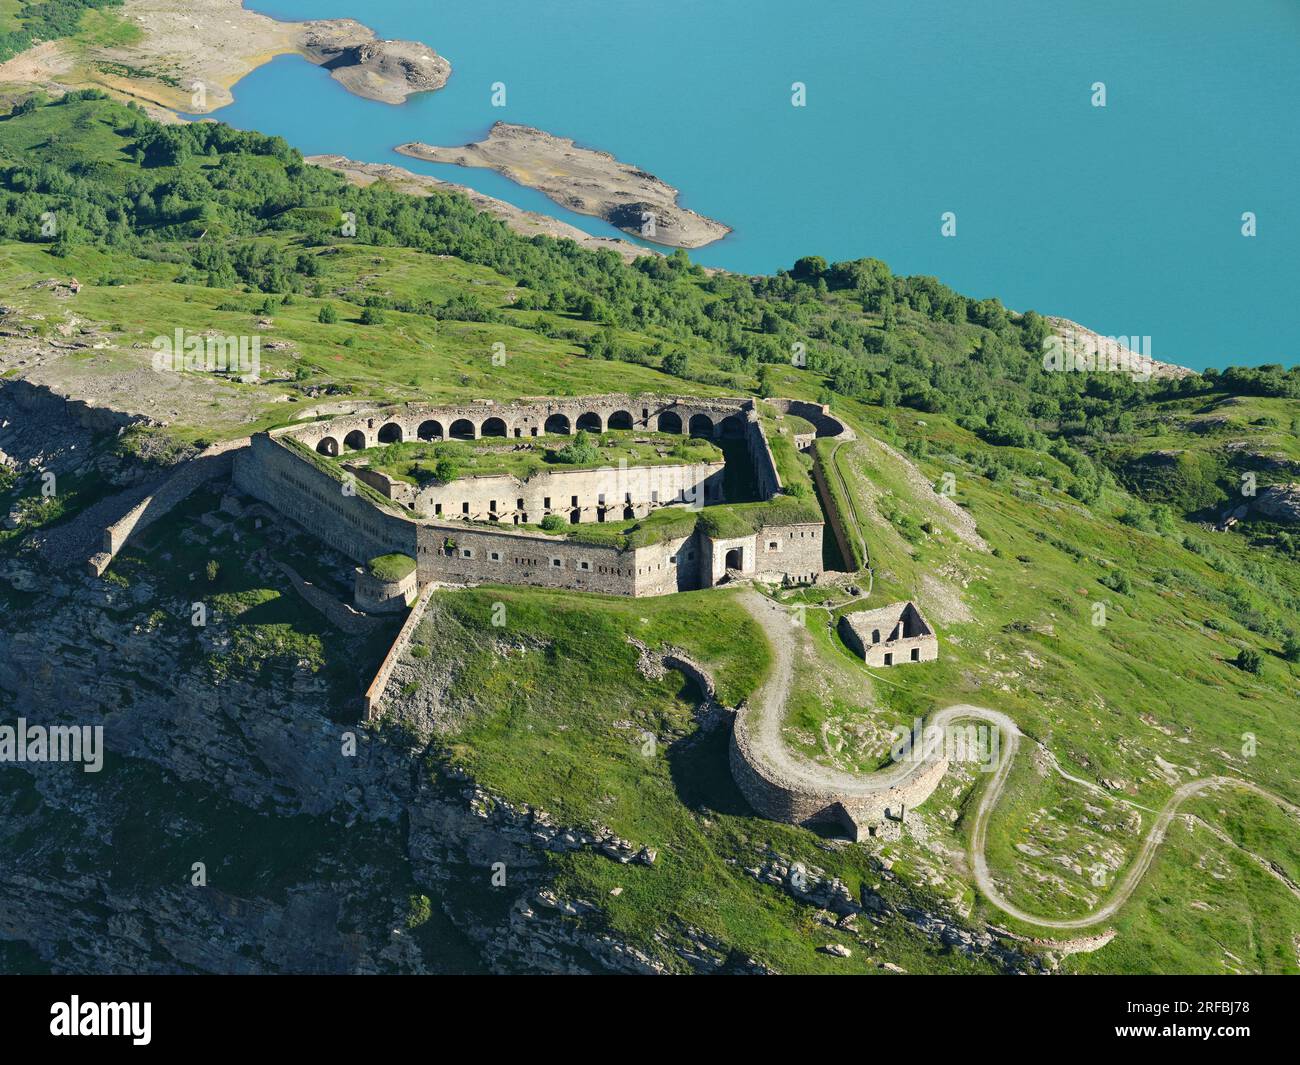 AERIAL VIEW. Variselle Fort (at 2085m asl). Built in the late 19th Century when the area was Italian (French after WWII). Mont-Cenis Pass, France. Stock Photo